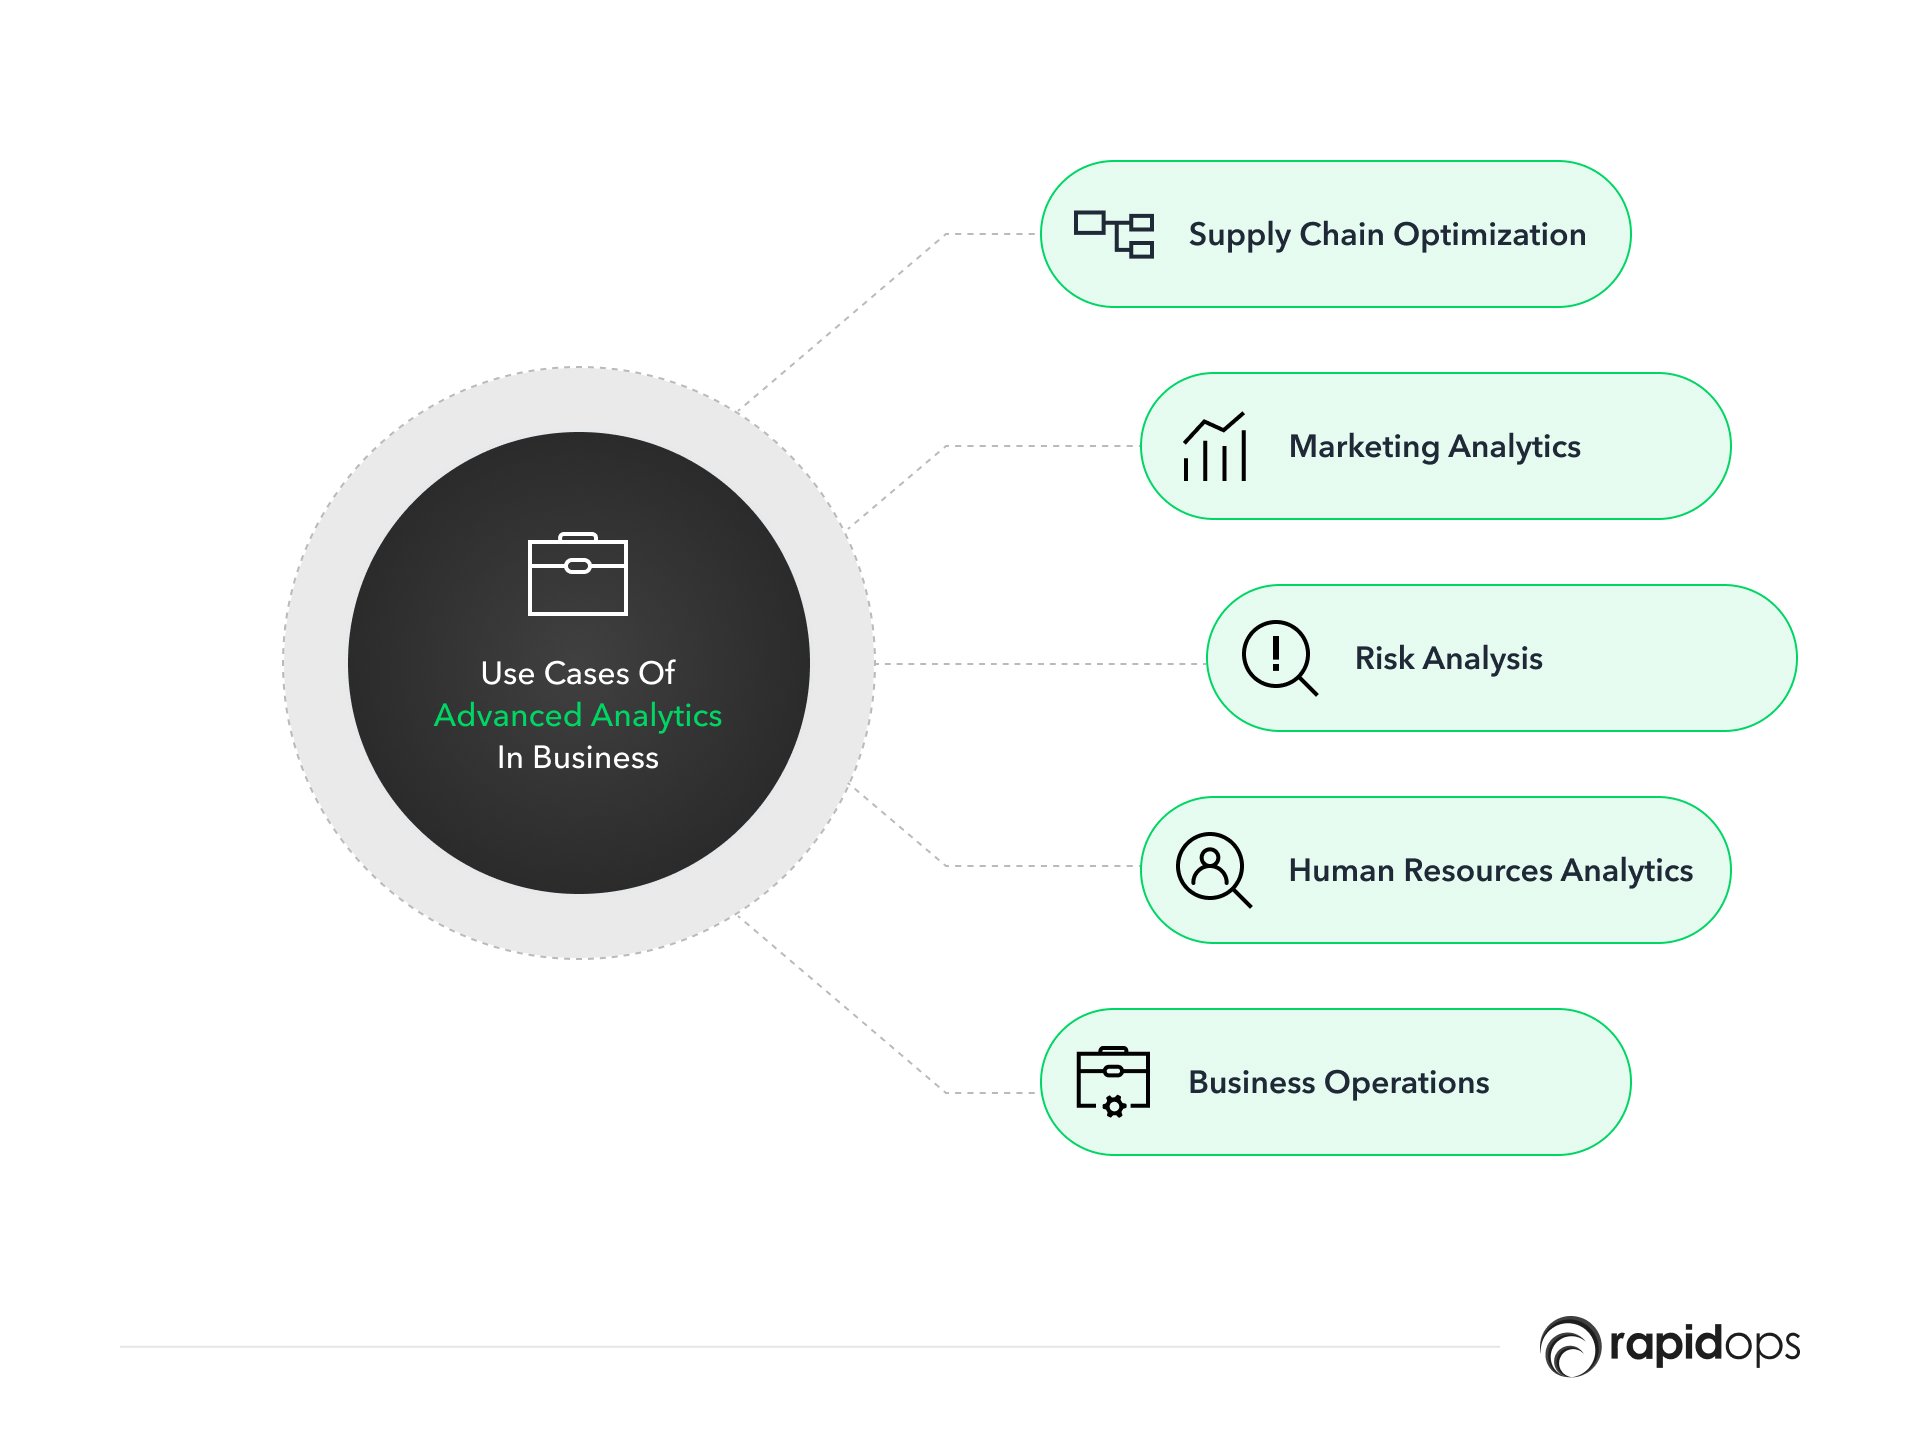 Use Cases of advanced analytics in business